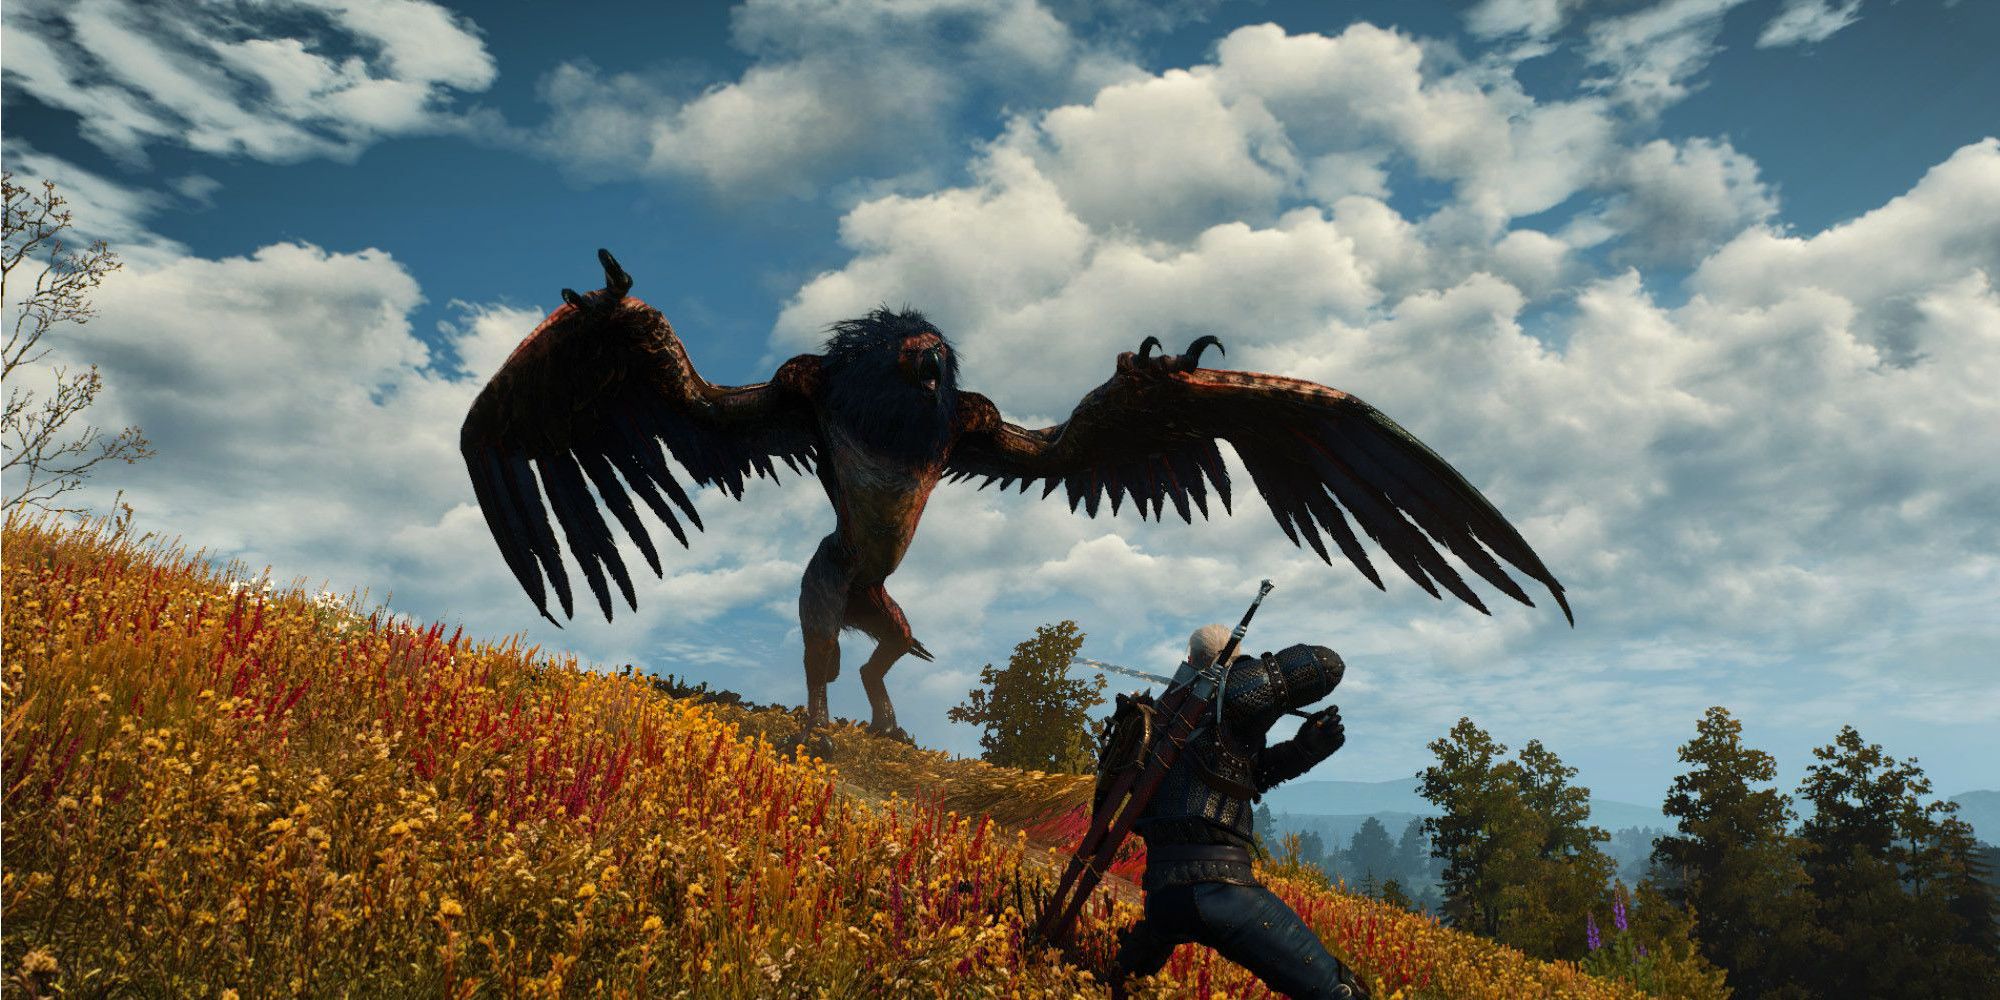 Witcher 3 - Geralt Going Up Against An Archgriffin